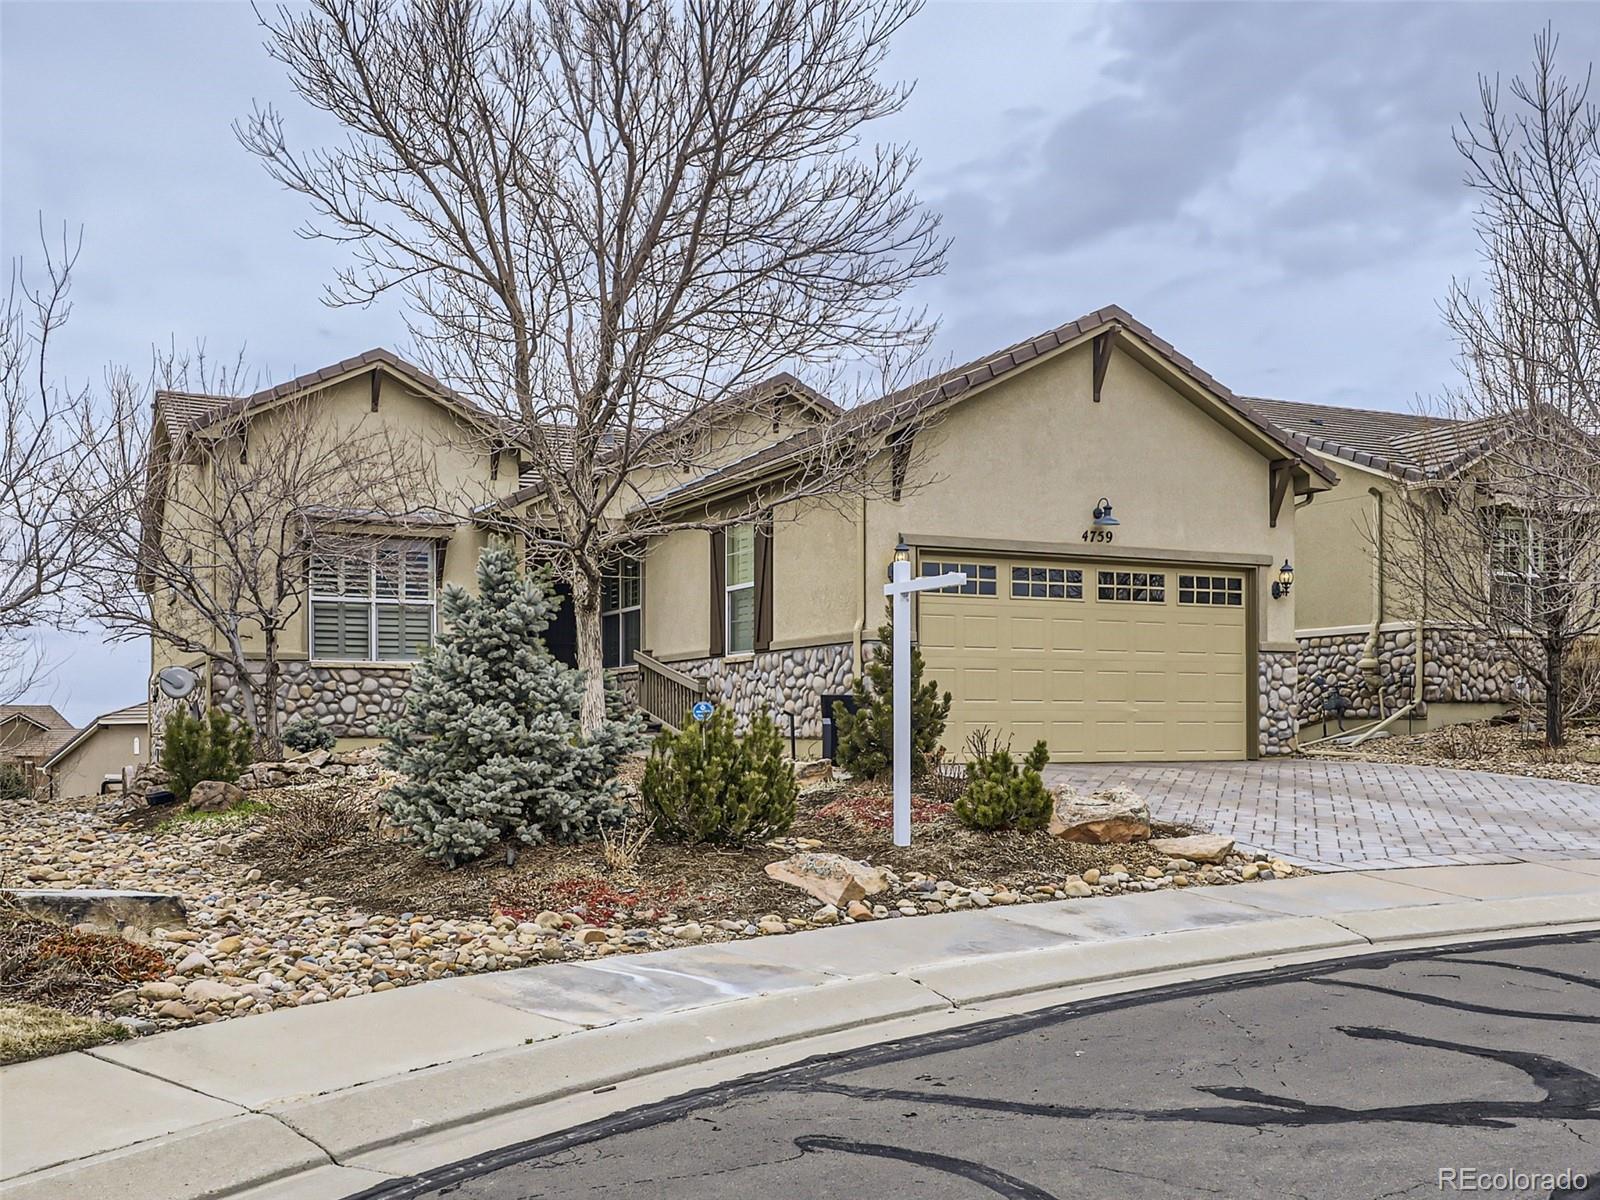 Report Image for 4759  Kismet Place,Broomfield, Colorado